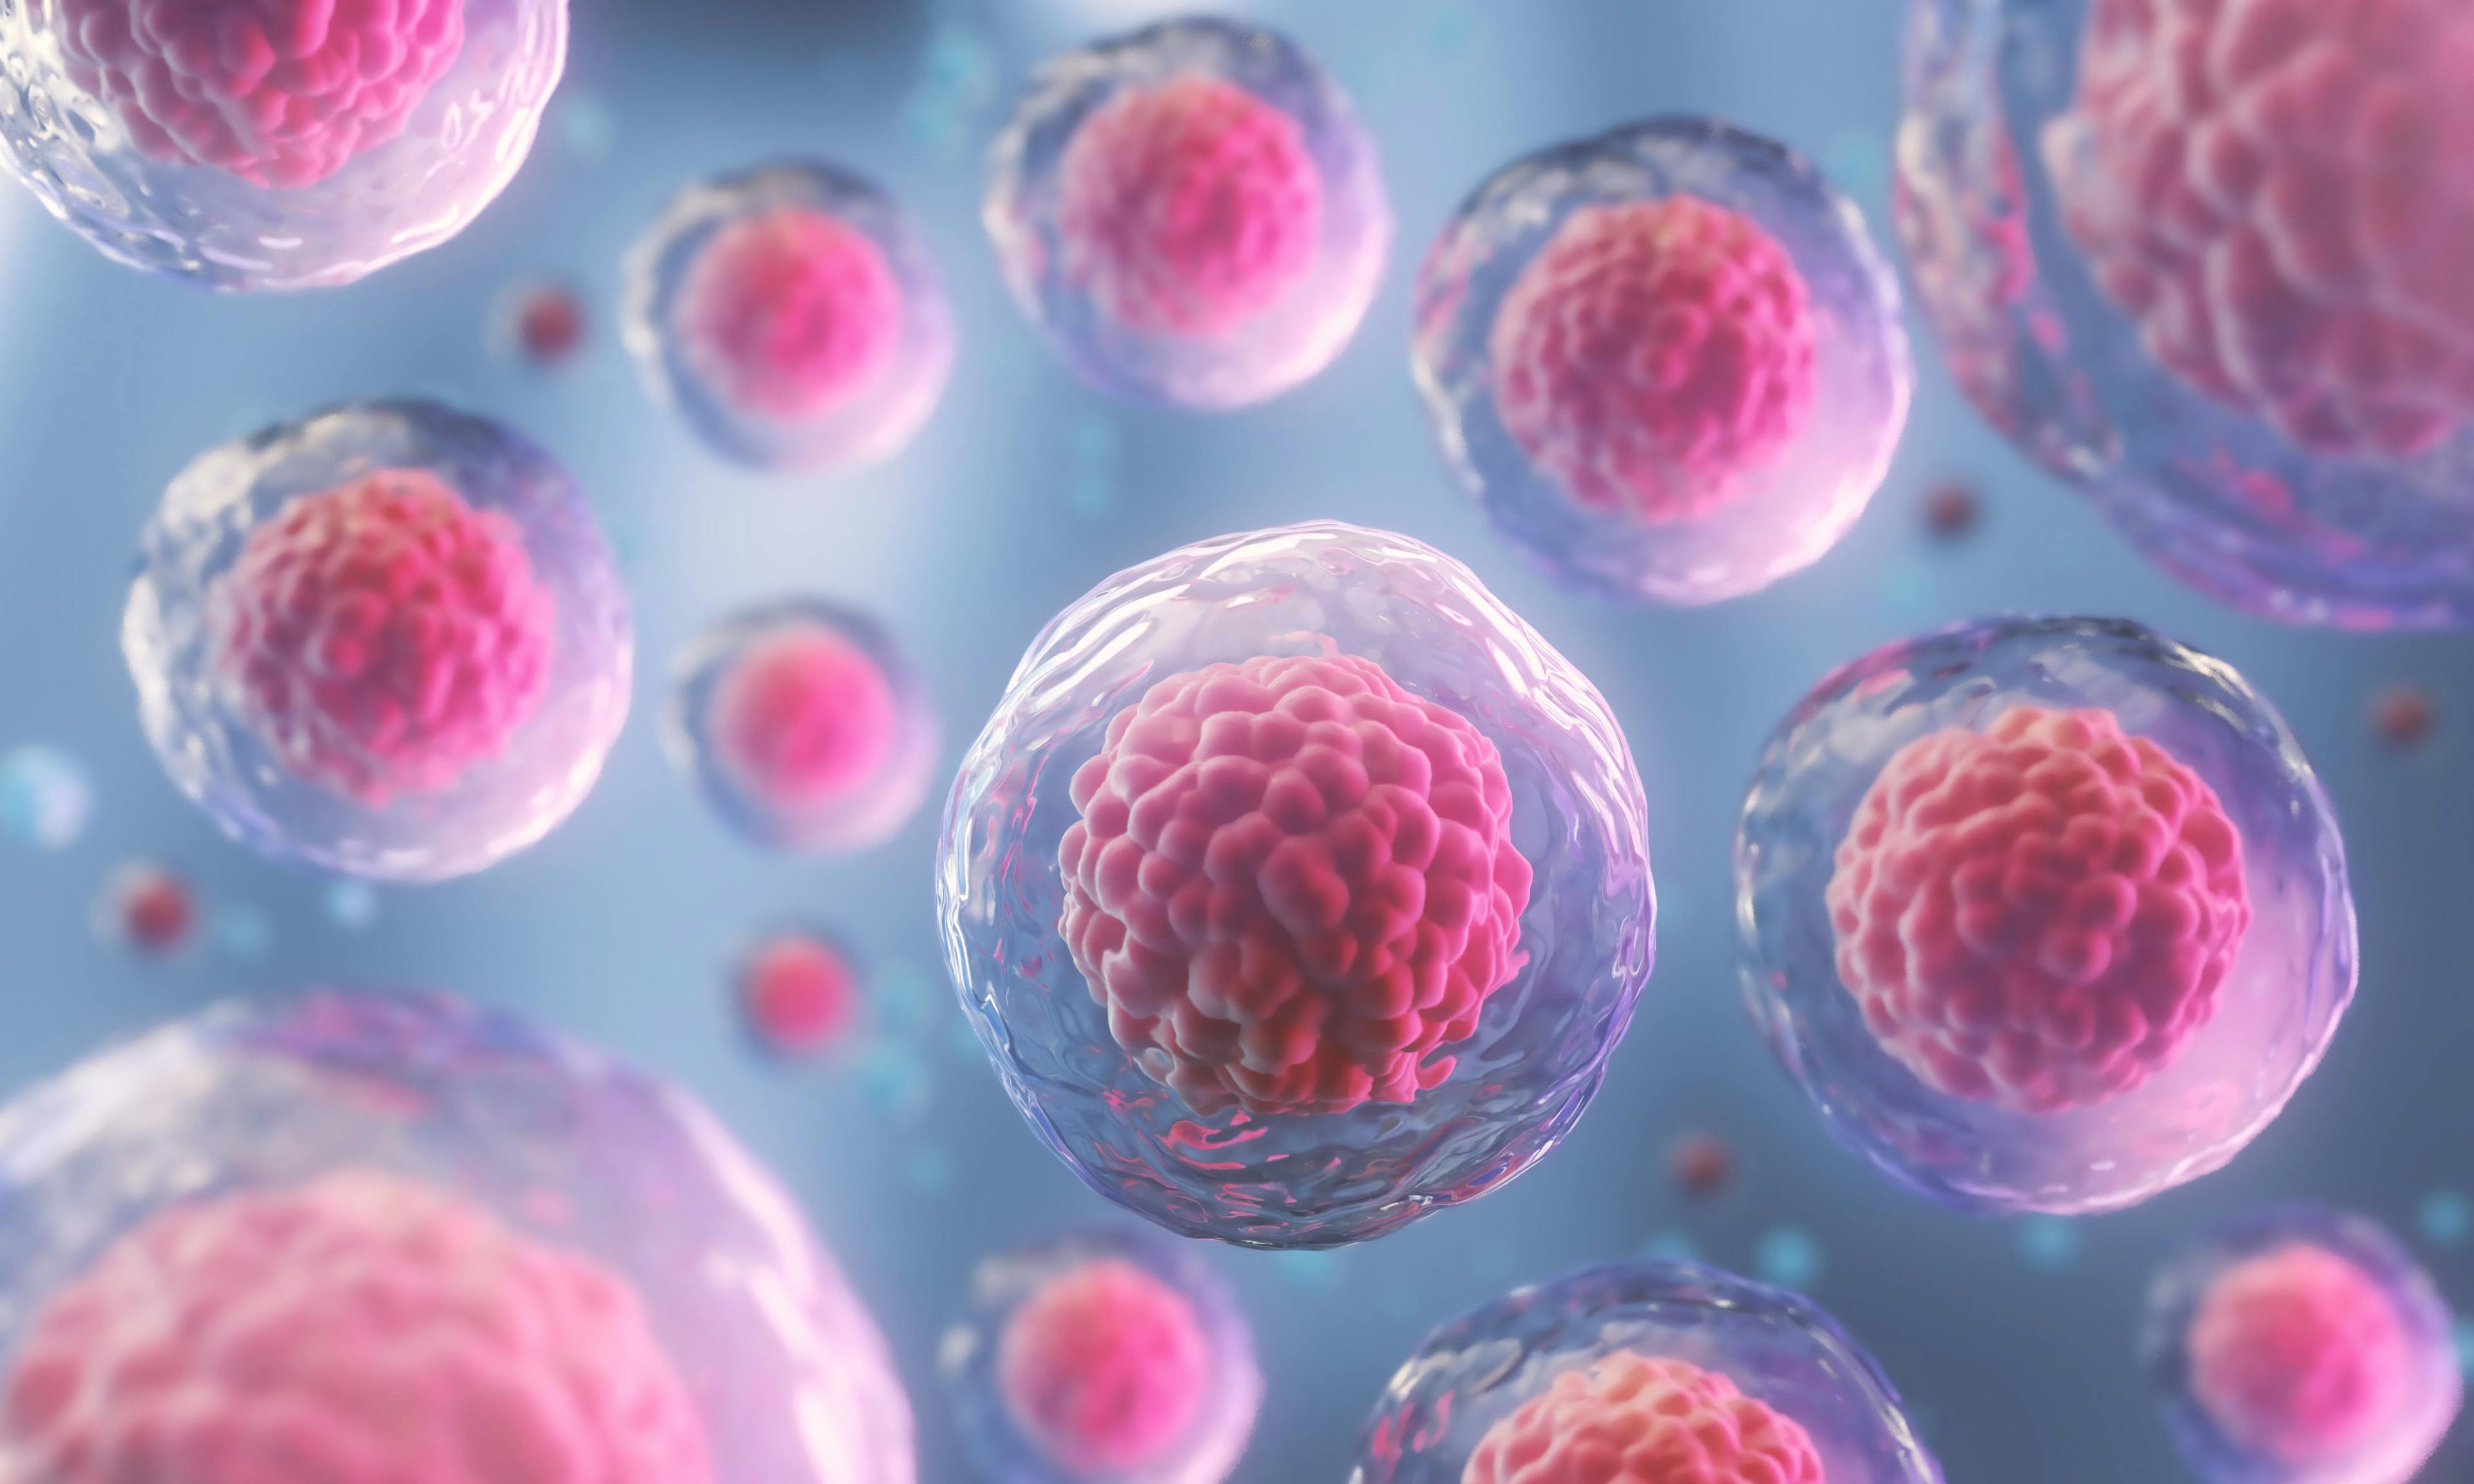 3d rendering of Human cell or Embryonic stem cell microscope background | Image Credit: © Anusorn - stock.adobe.com